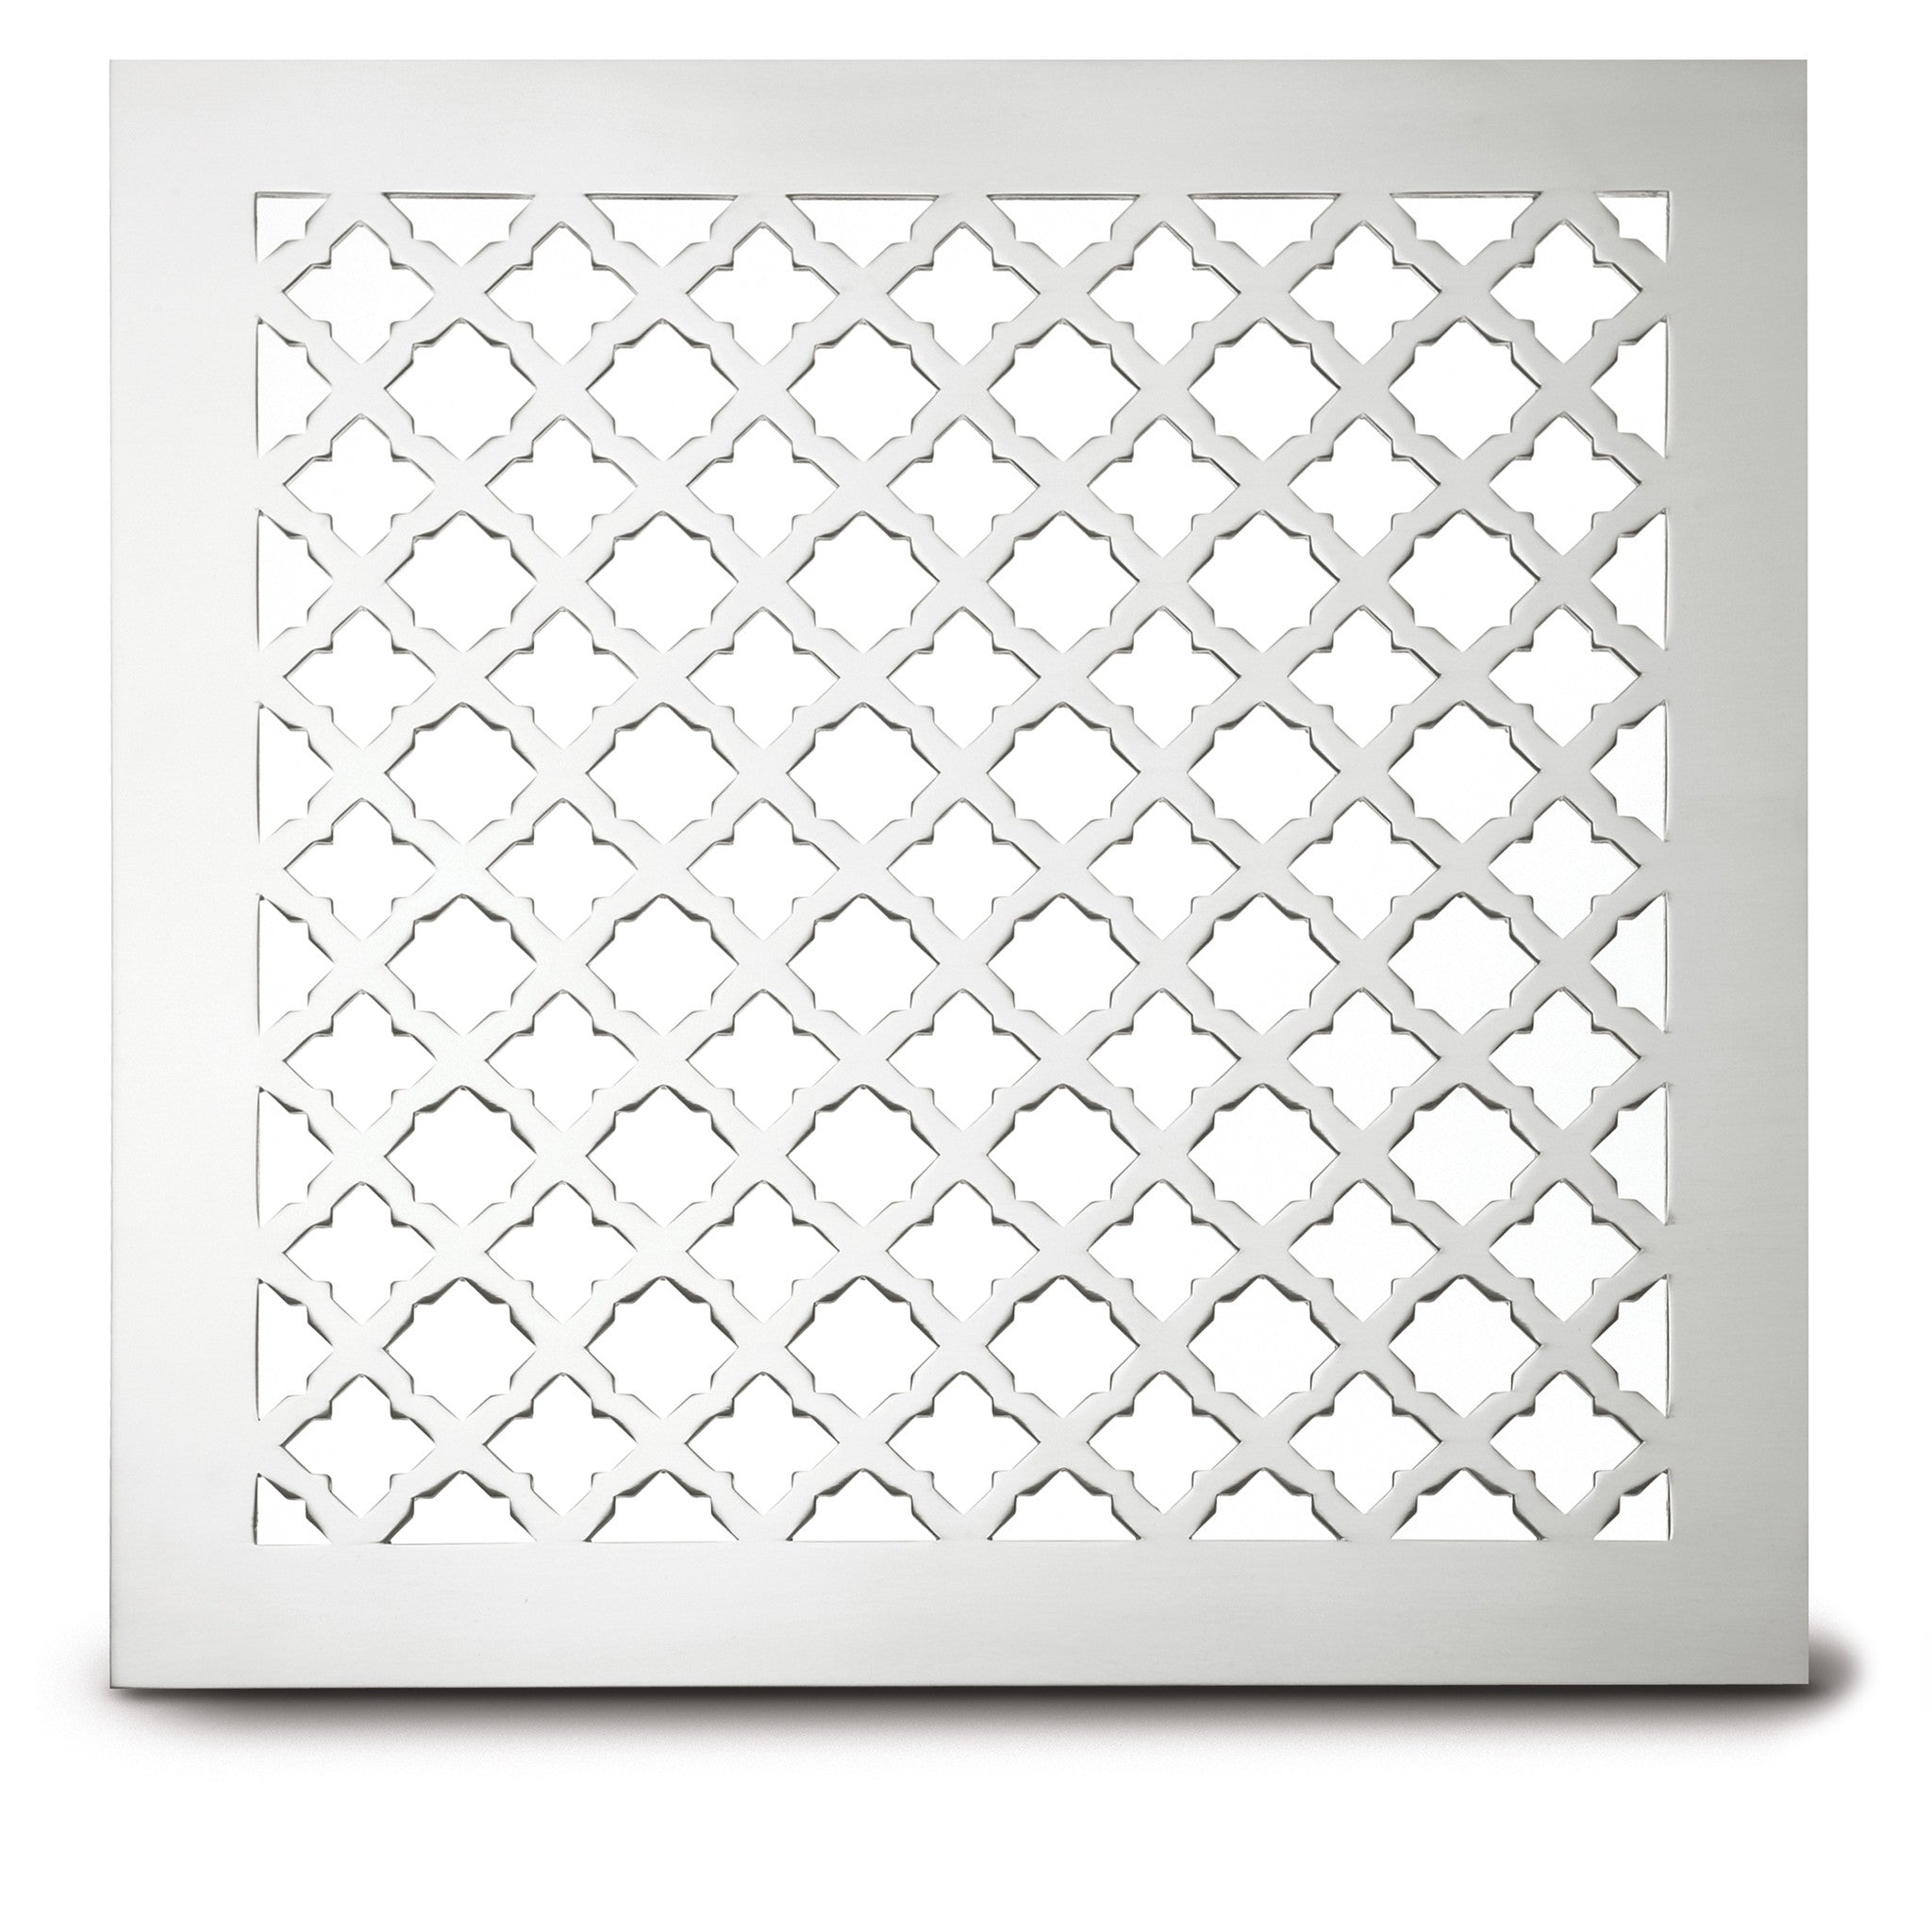 214 Gothic Perforated Grille: 1 1/16” pattern - 58% open area